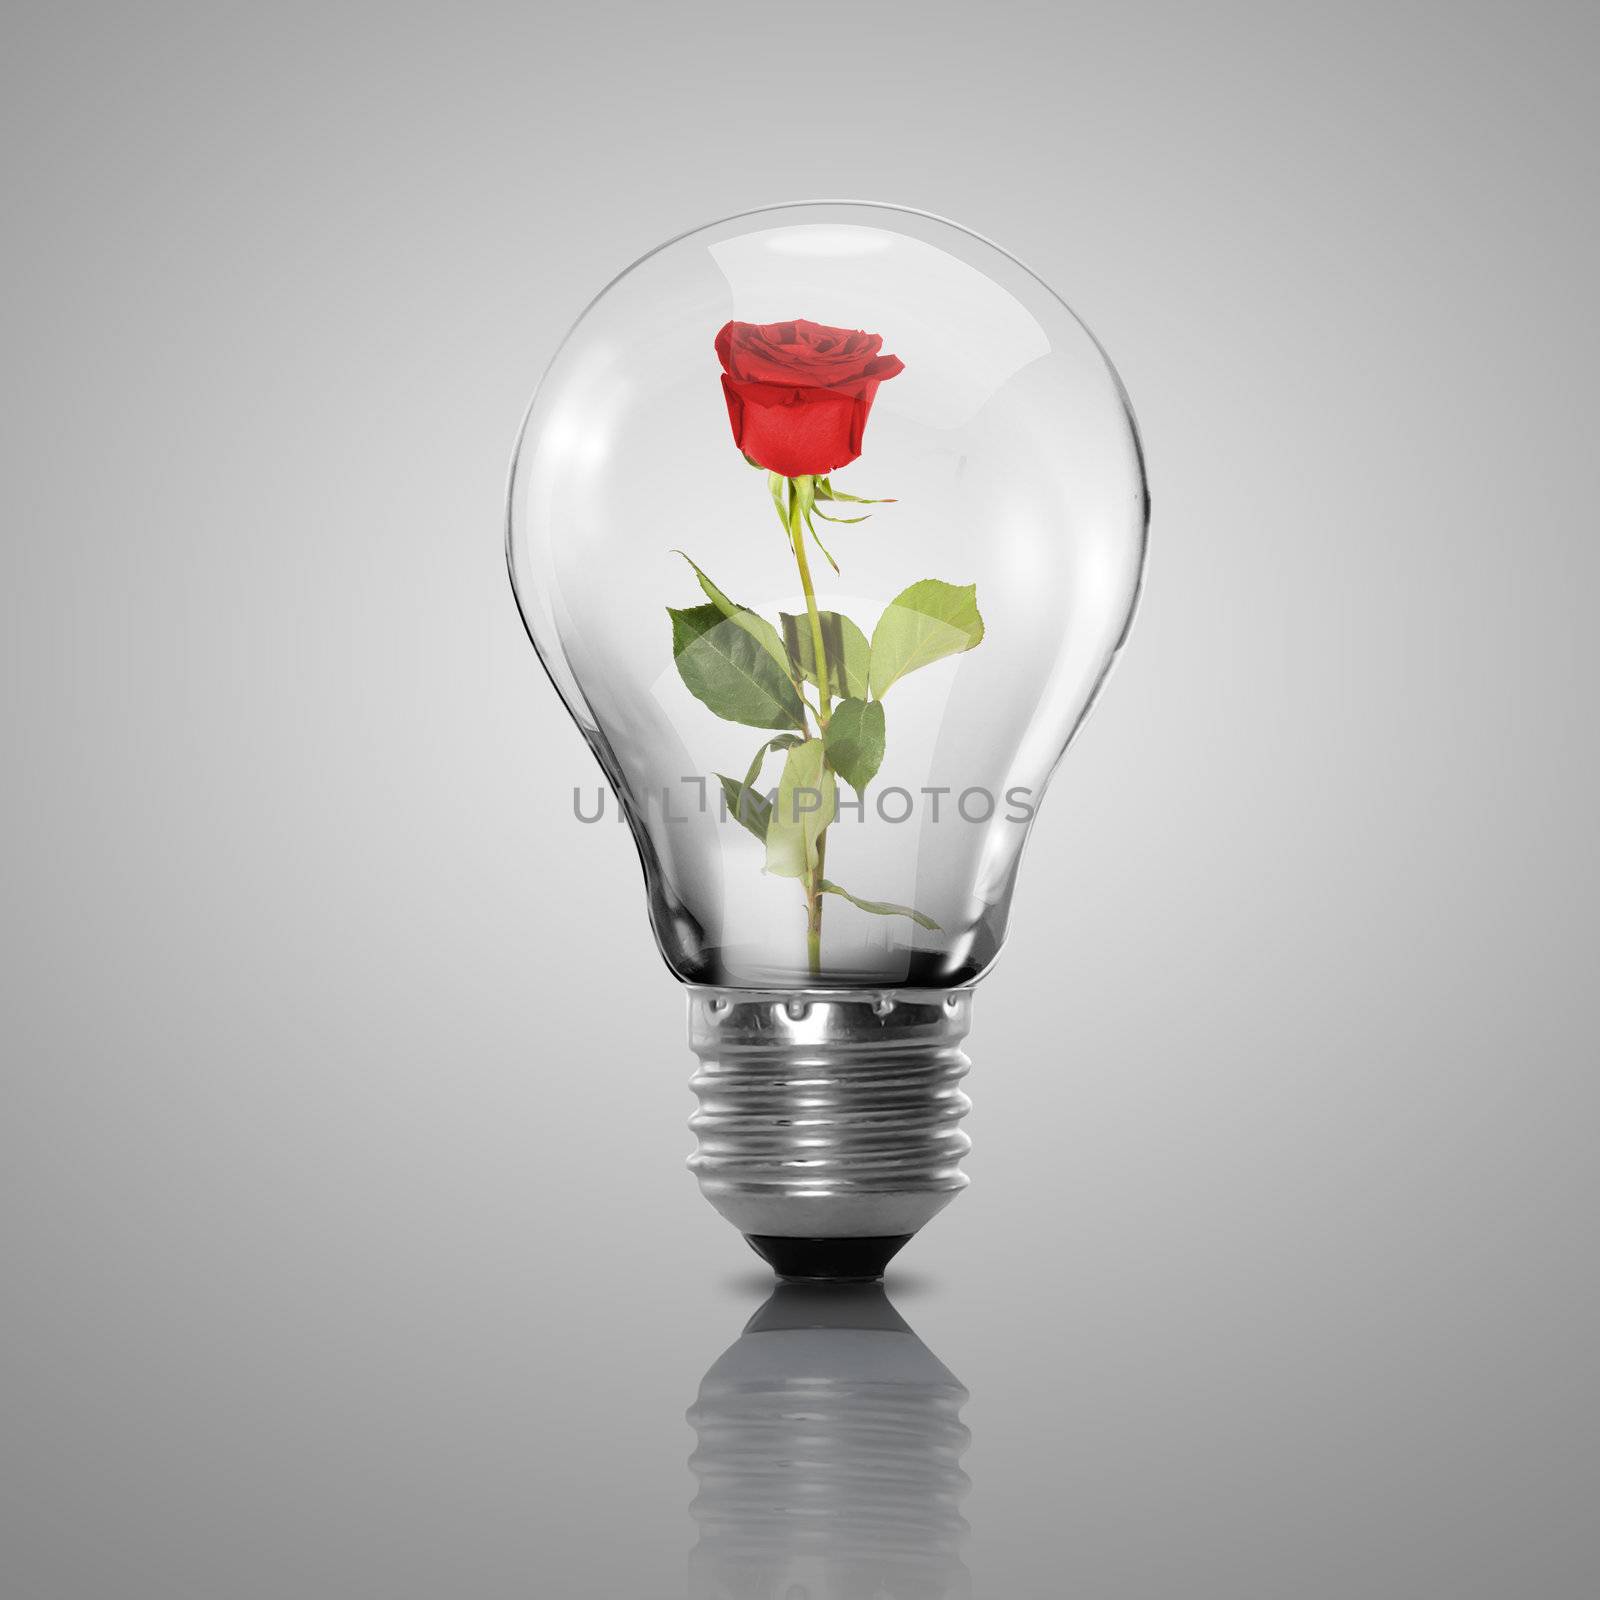 Electric light bulb and flower inside it as symbol of green energy